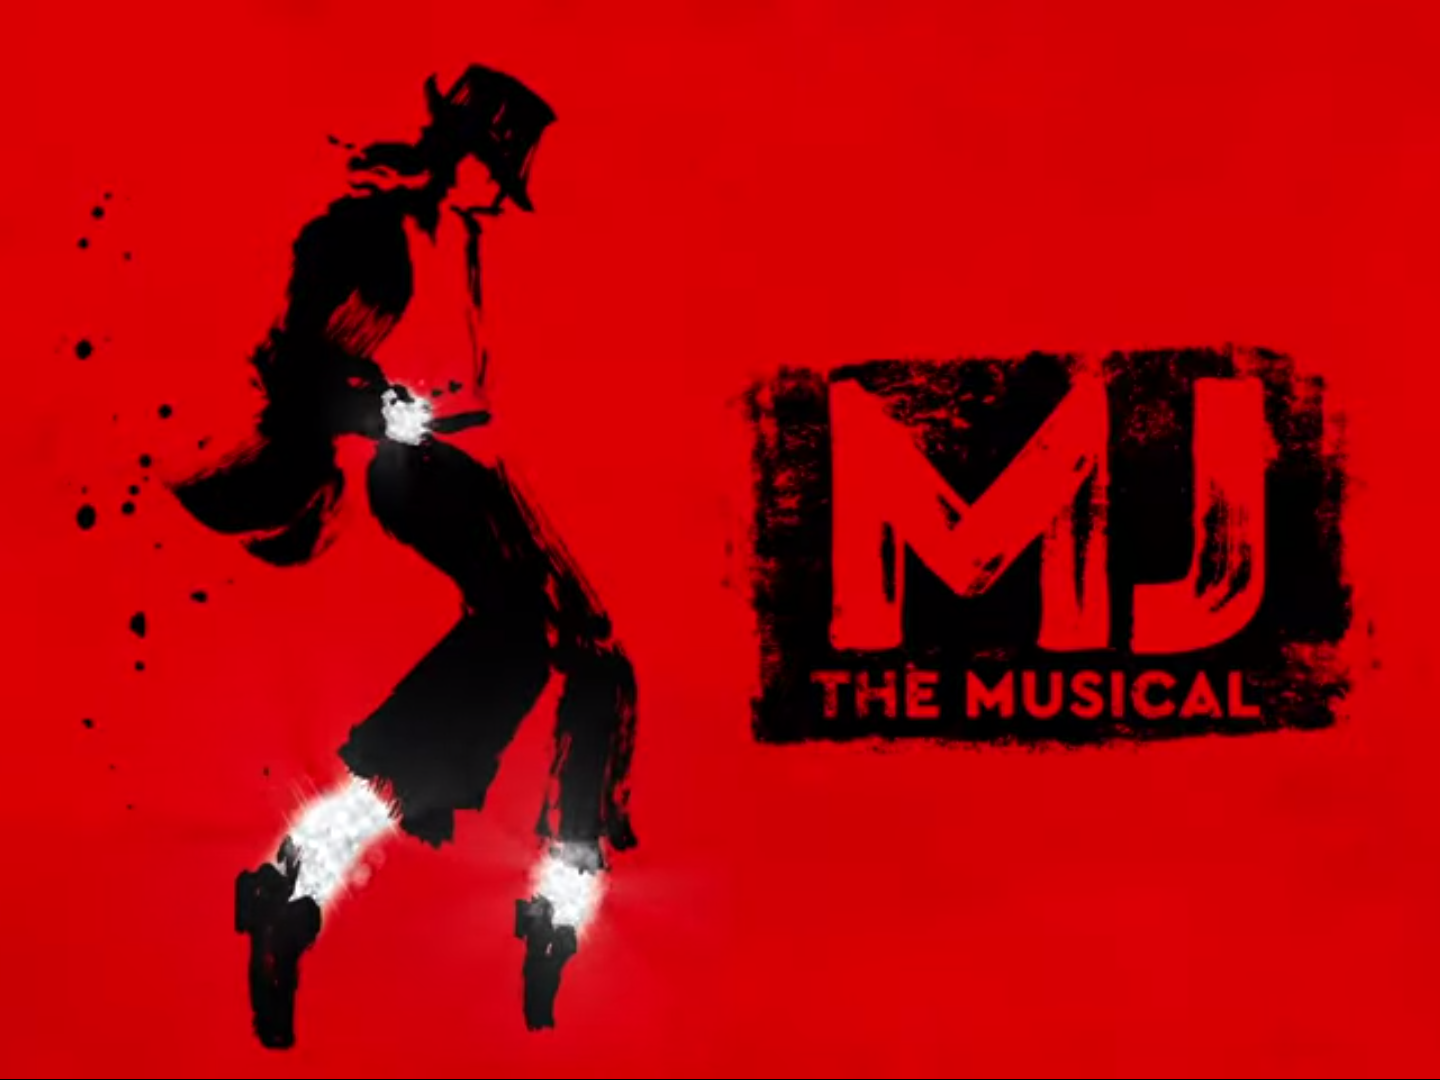 The musical is scheduled to open 6 July